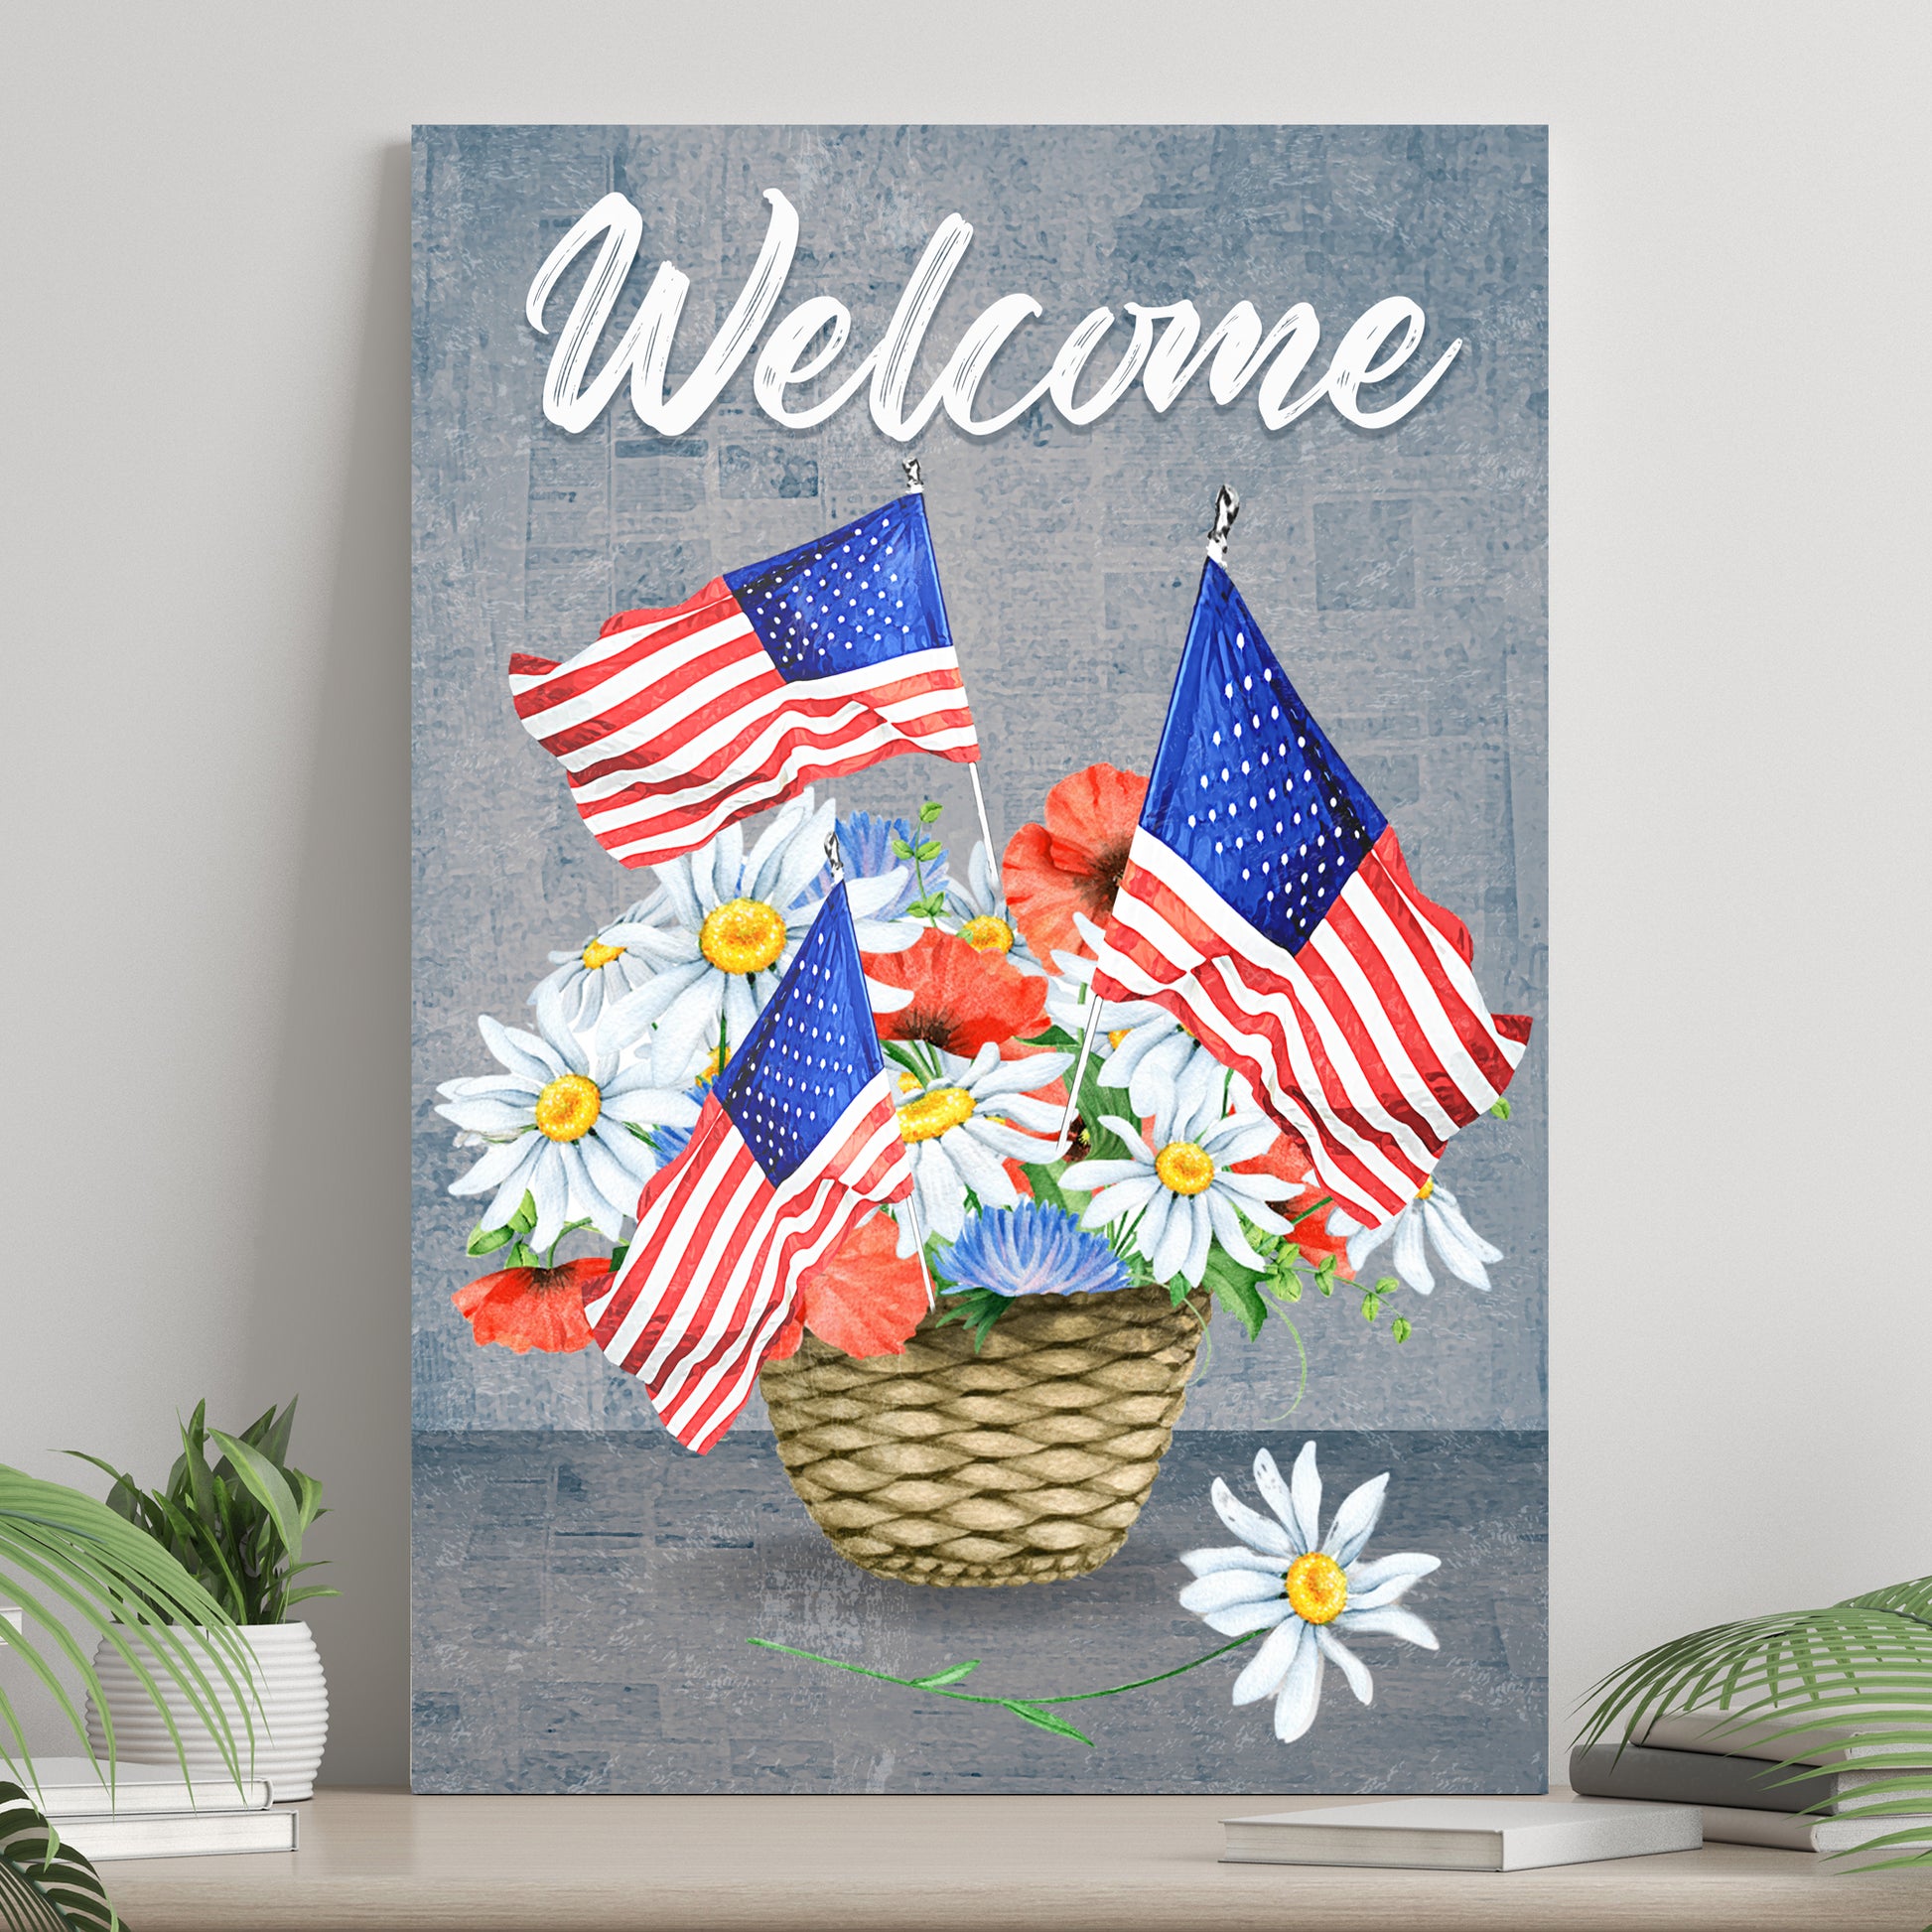 Welcome America Sign - Image by Tailored Canvases